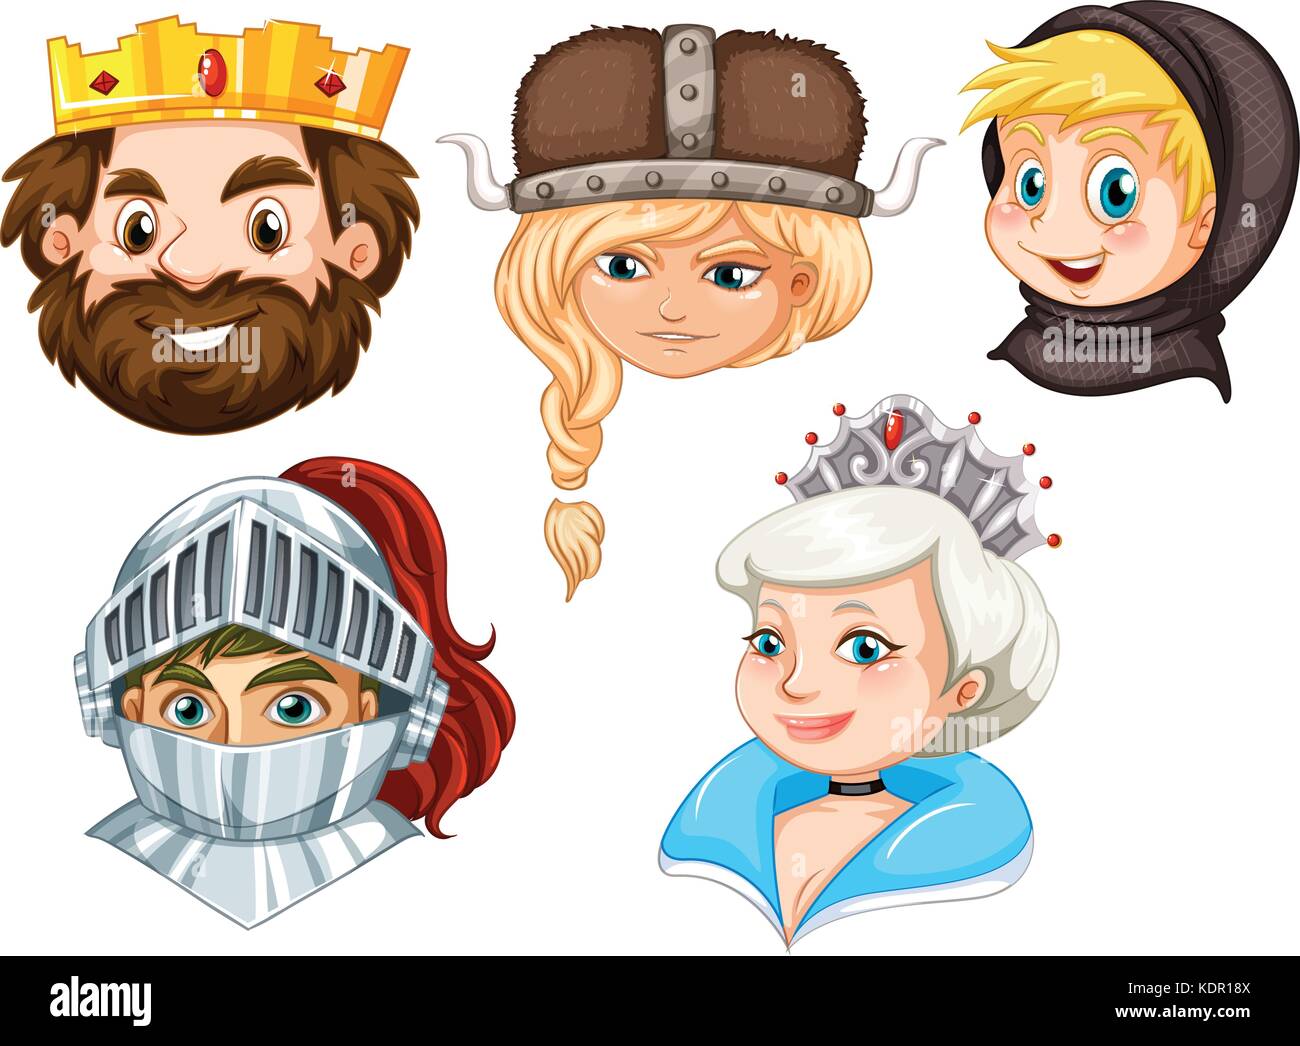 Fairytale characters on white background illustration Stock Vector